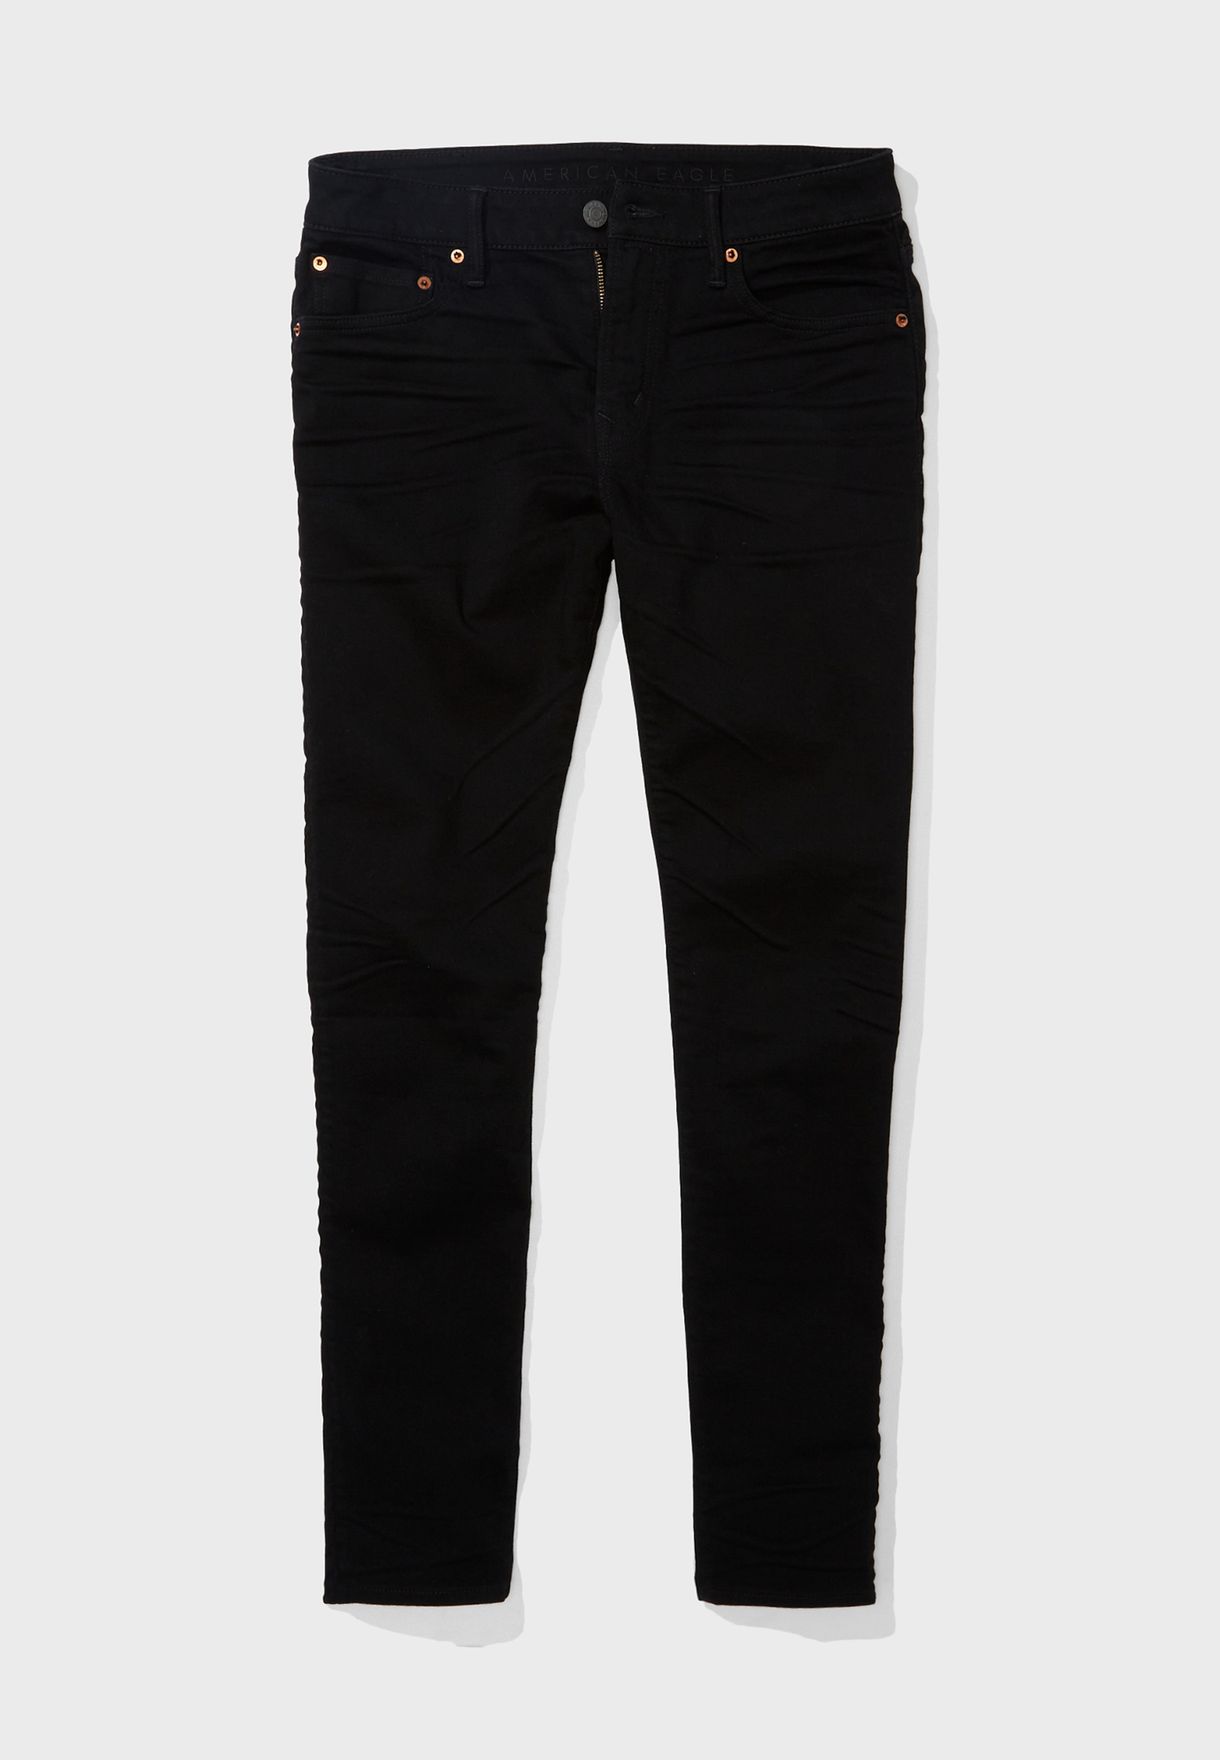 Rinse Skinny Fit Jeans